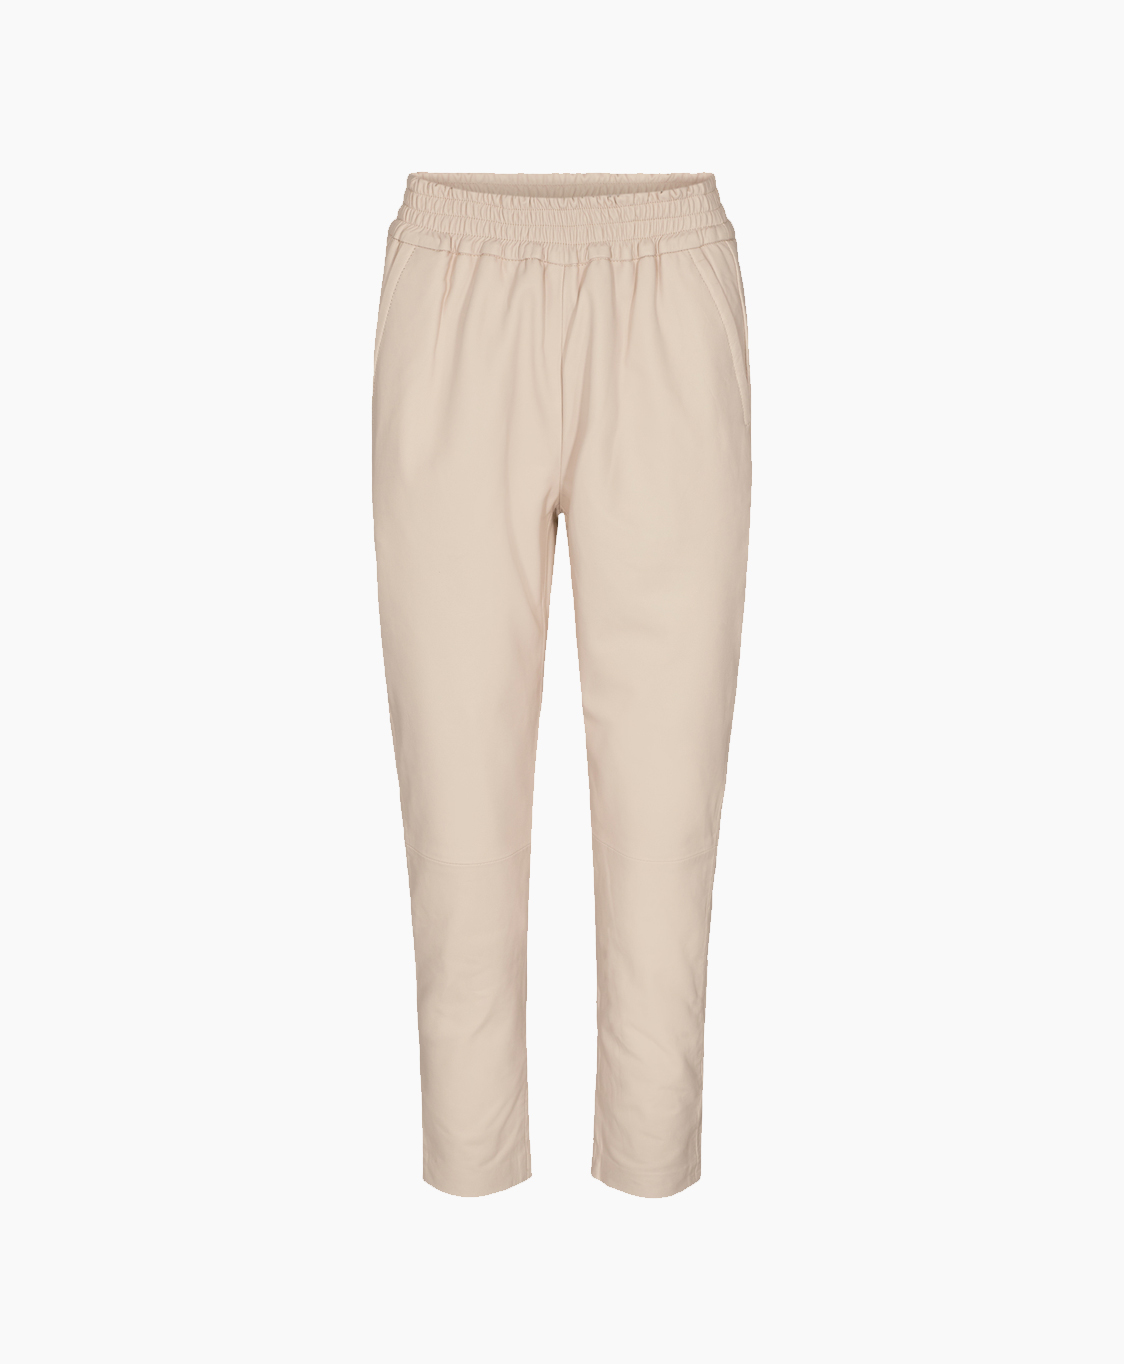 Co'couture Broek Shiloh Leather Off White